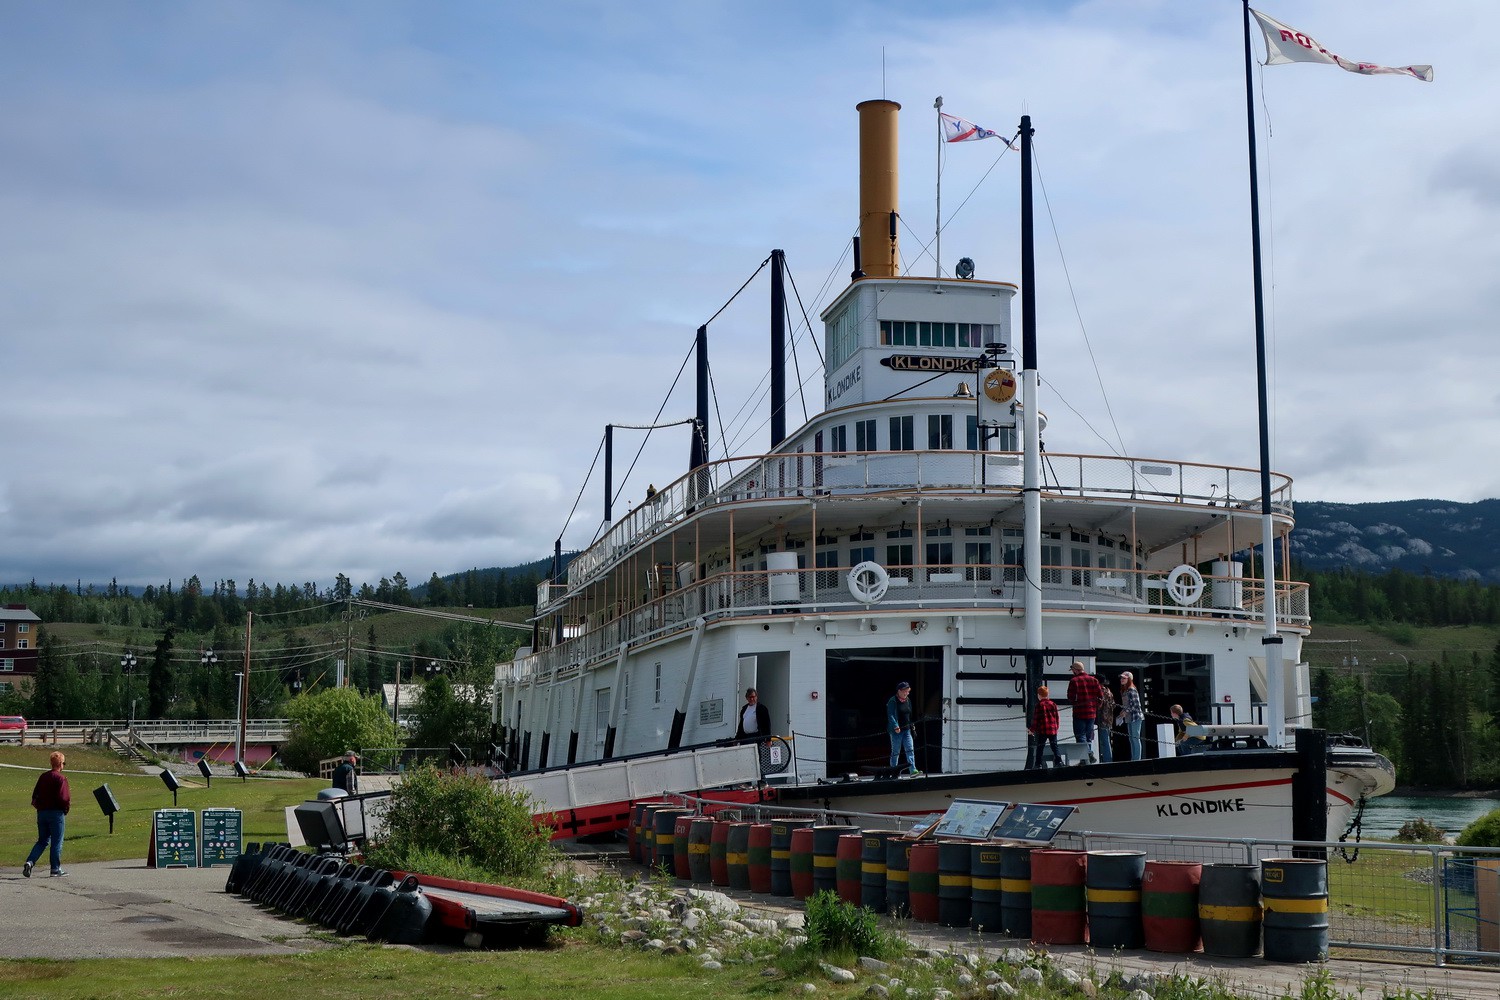 Sternwheeler SS Klondike in Whitehorse, also very important during the Gold Rush